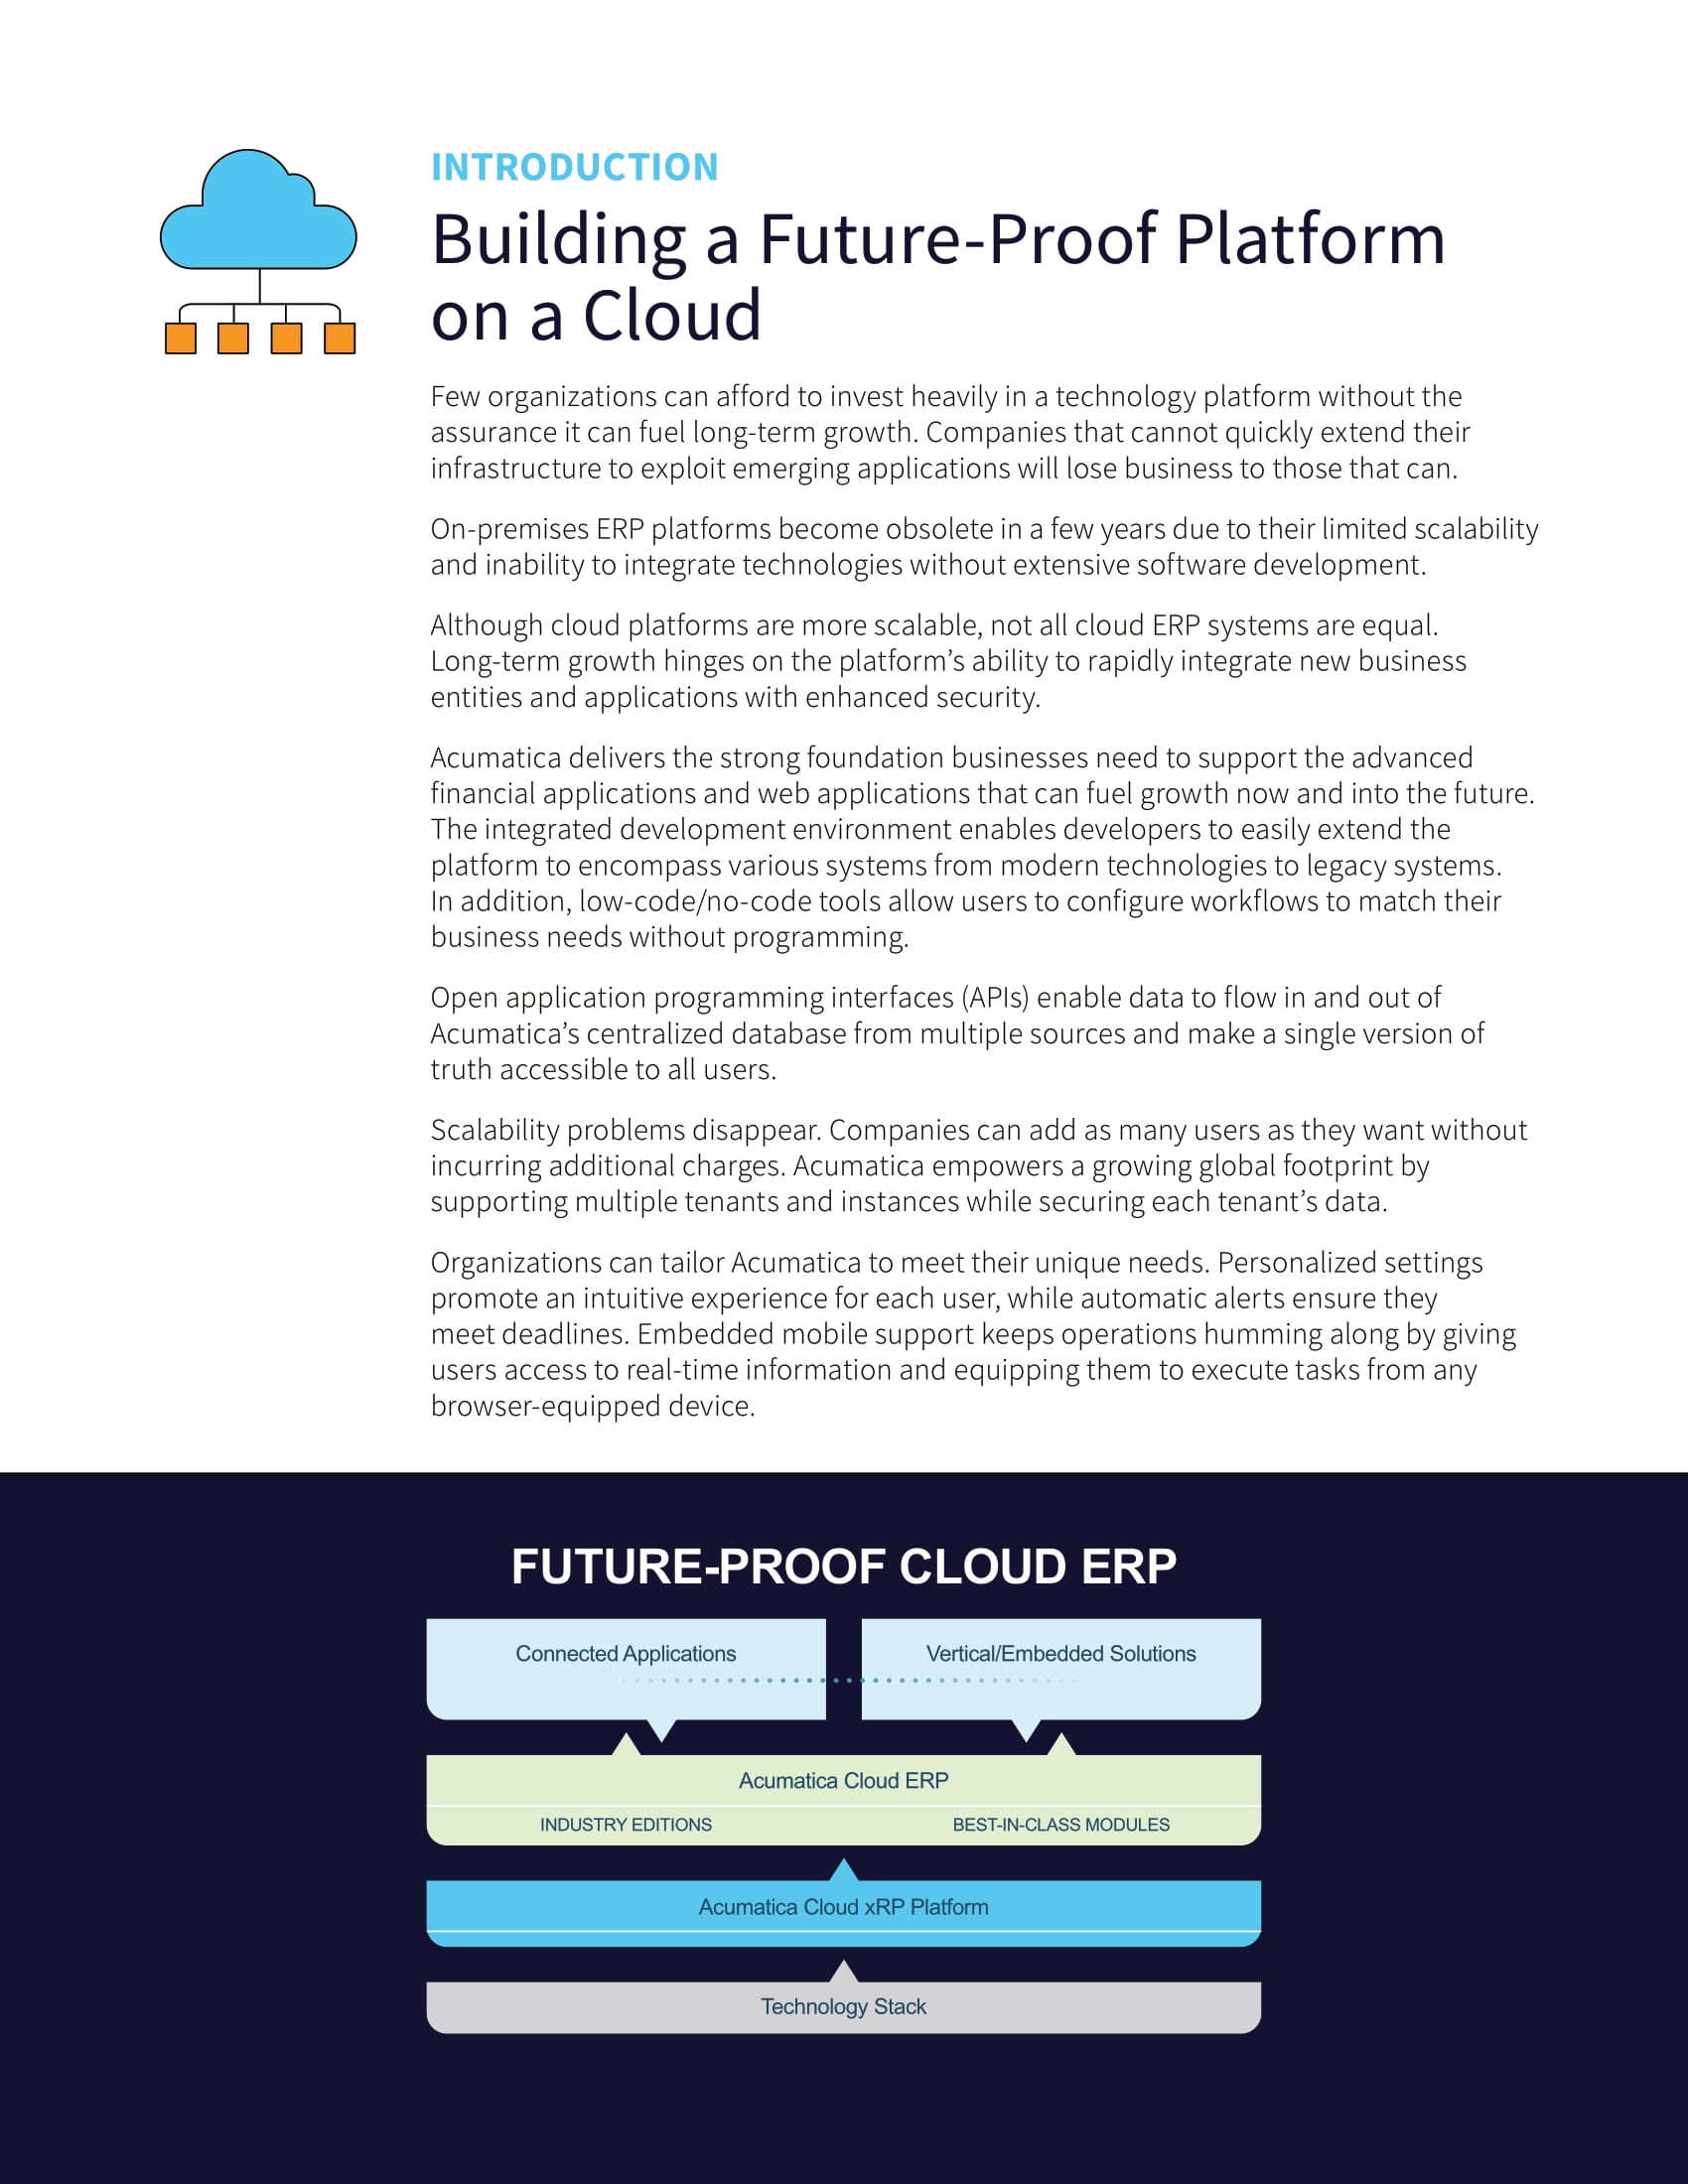 Transforming Organizations with a Future-Proof Platform, page 1